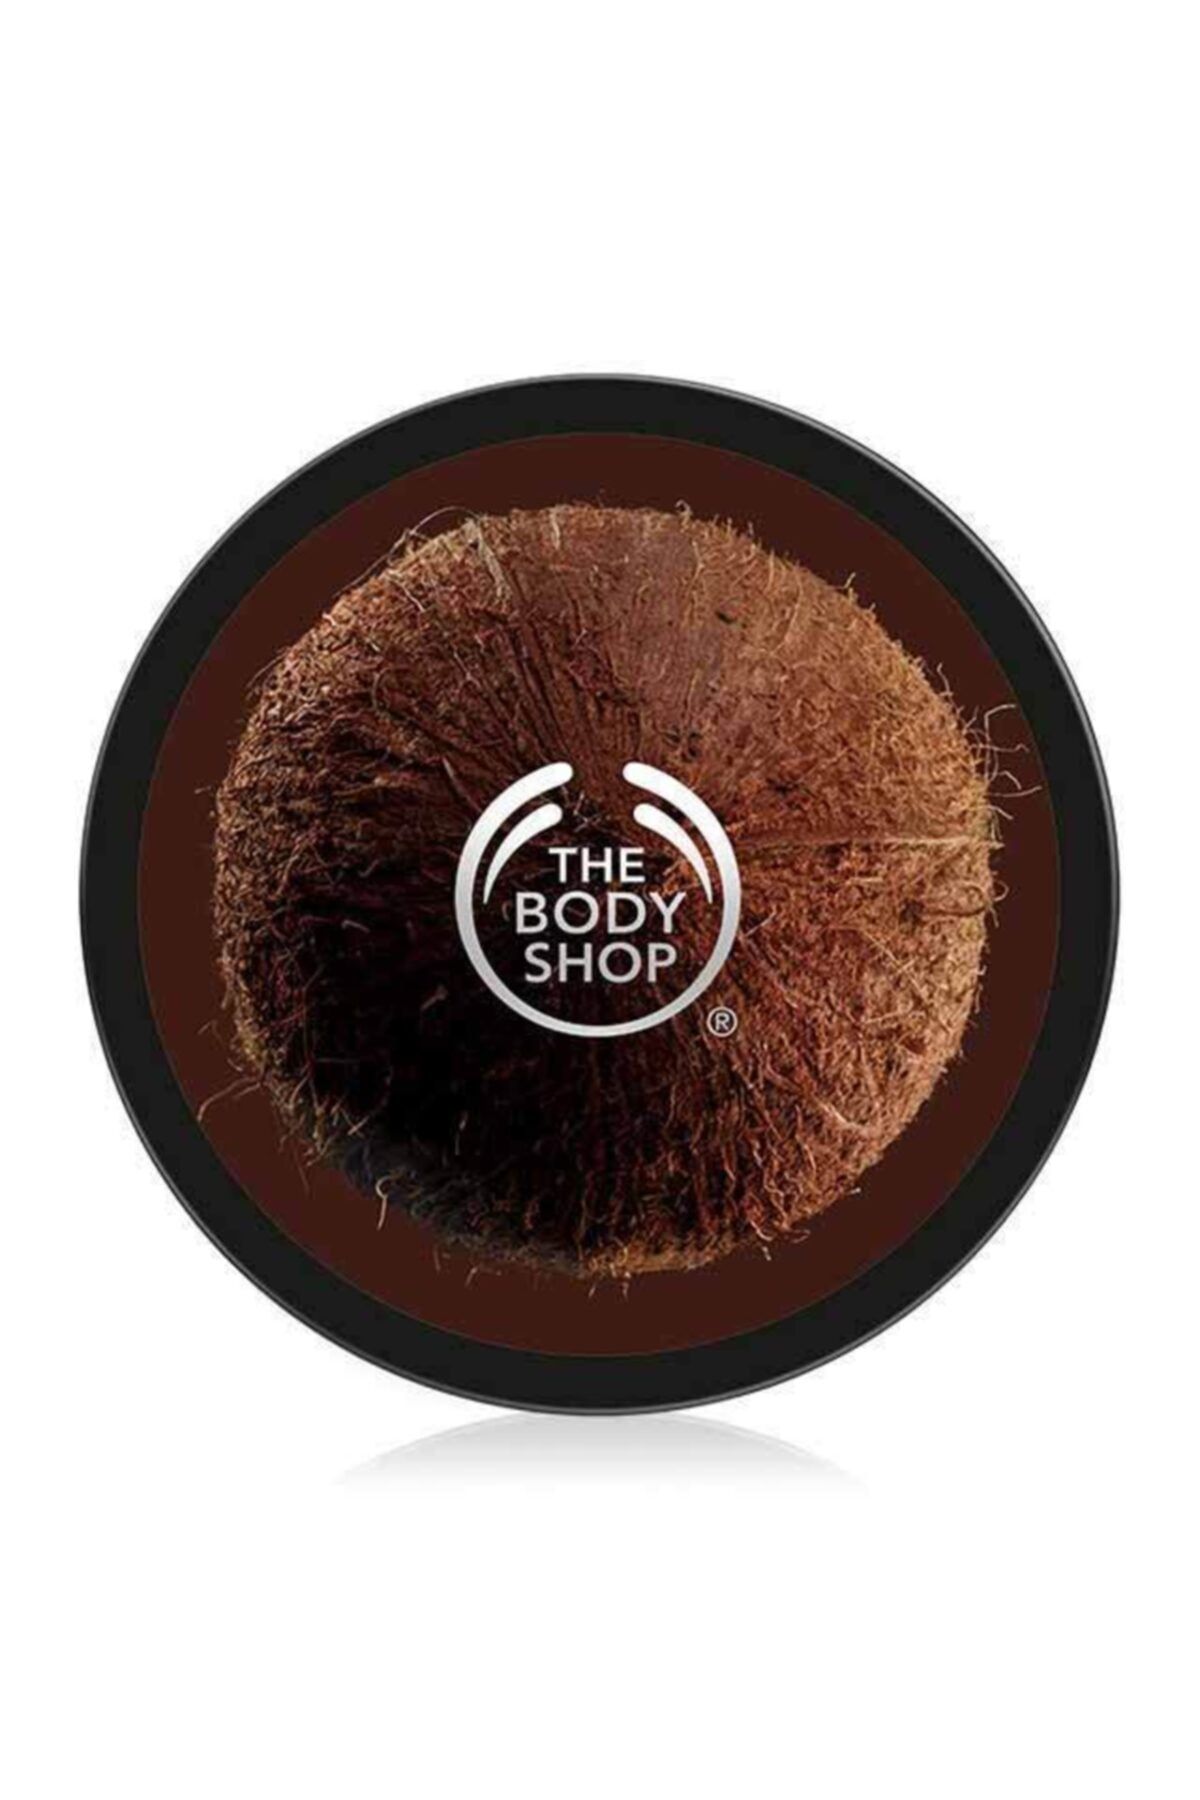 THE BODY SHOP Coconut Body Butter 200ml